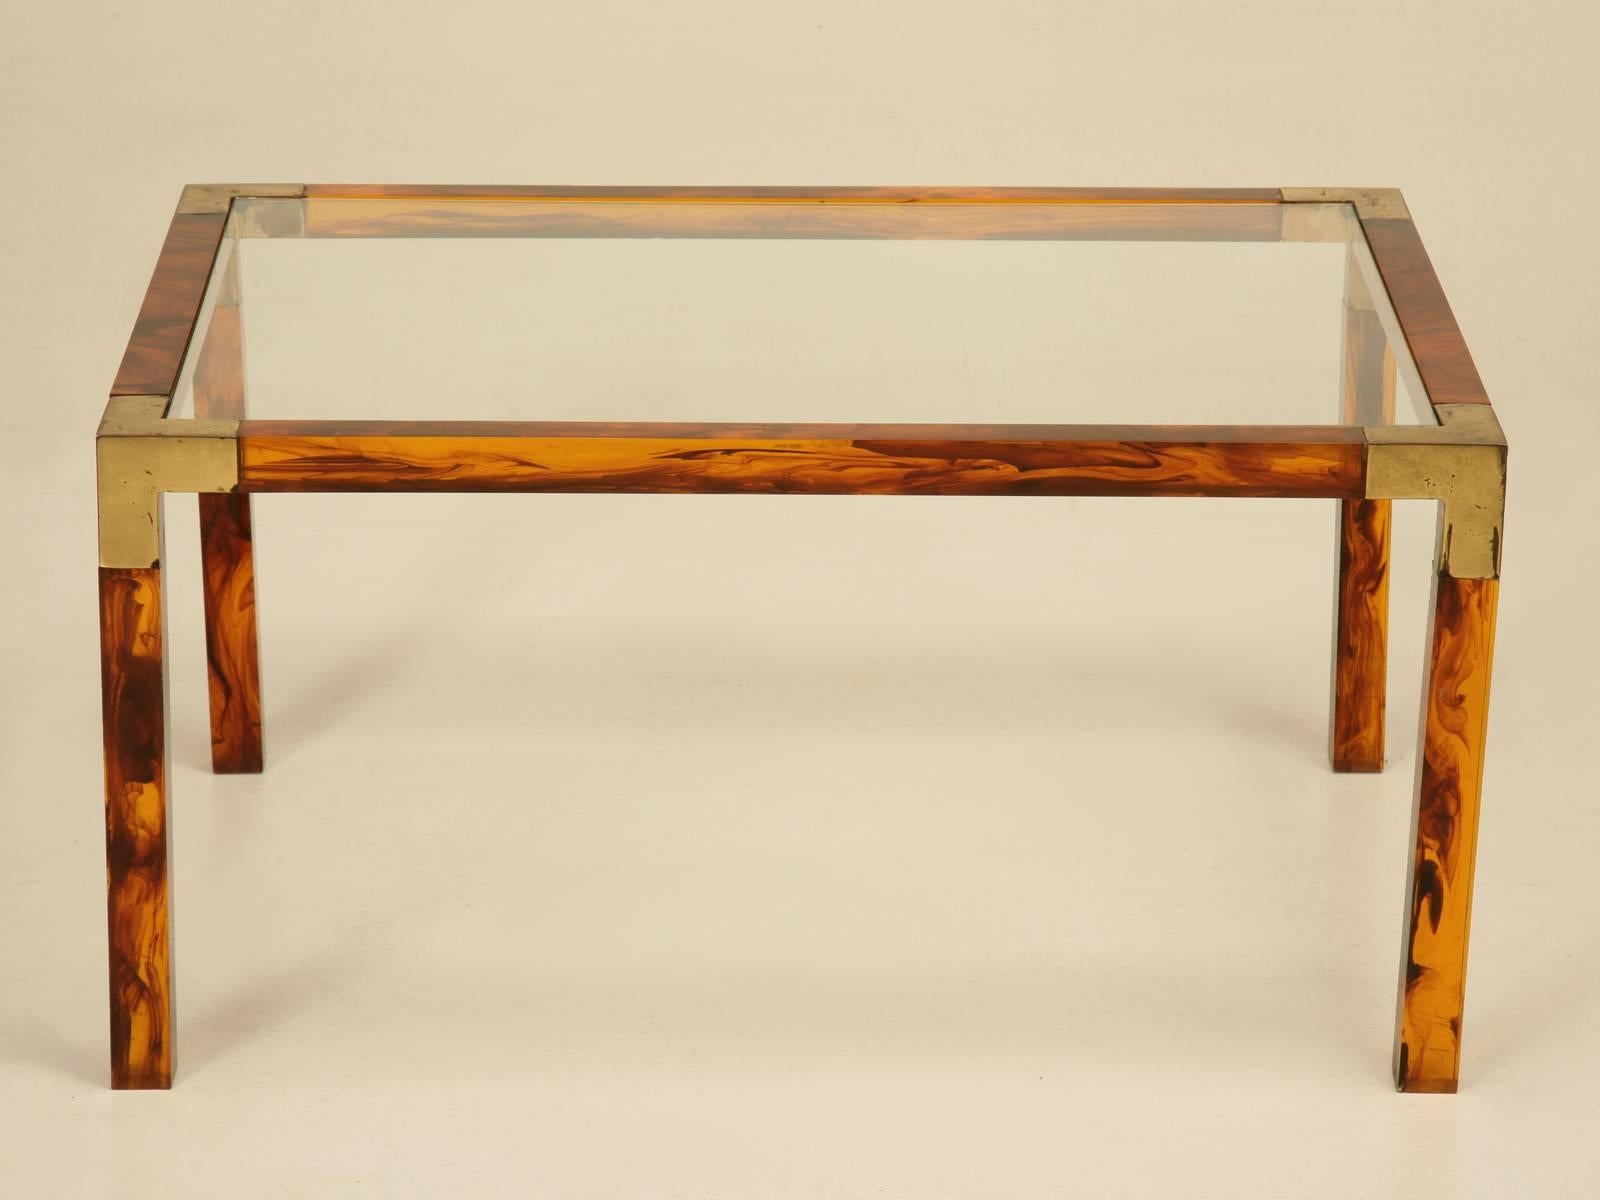 Faux tortoise shell acrylic and brass petite French coffee table. This has to be one of the most unusual and elegant tables we have ever had and I am sure they were mass produced, but we have never seen one before. Please note the patination on the